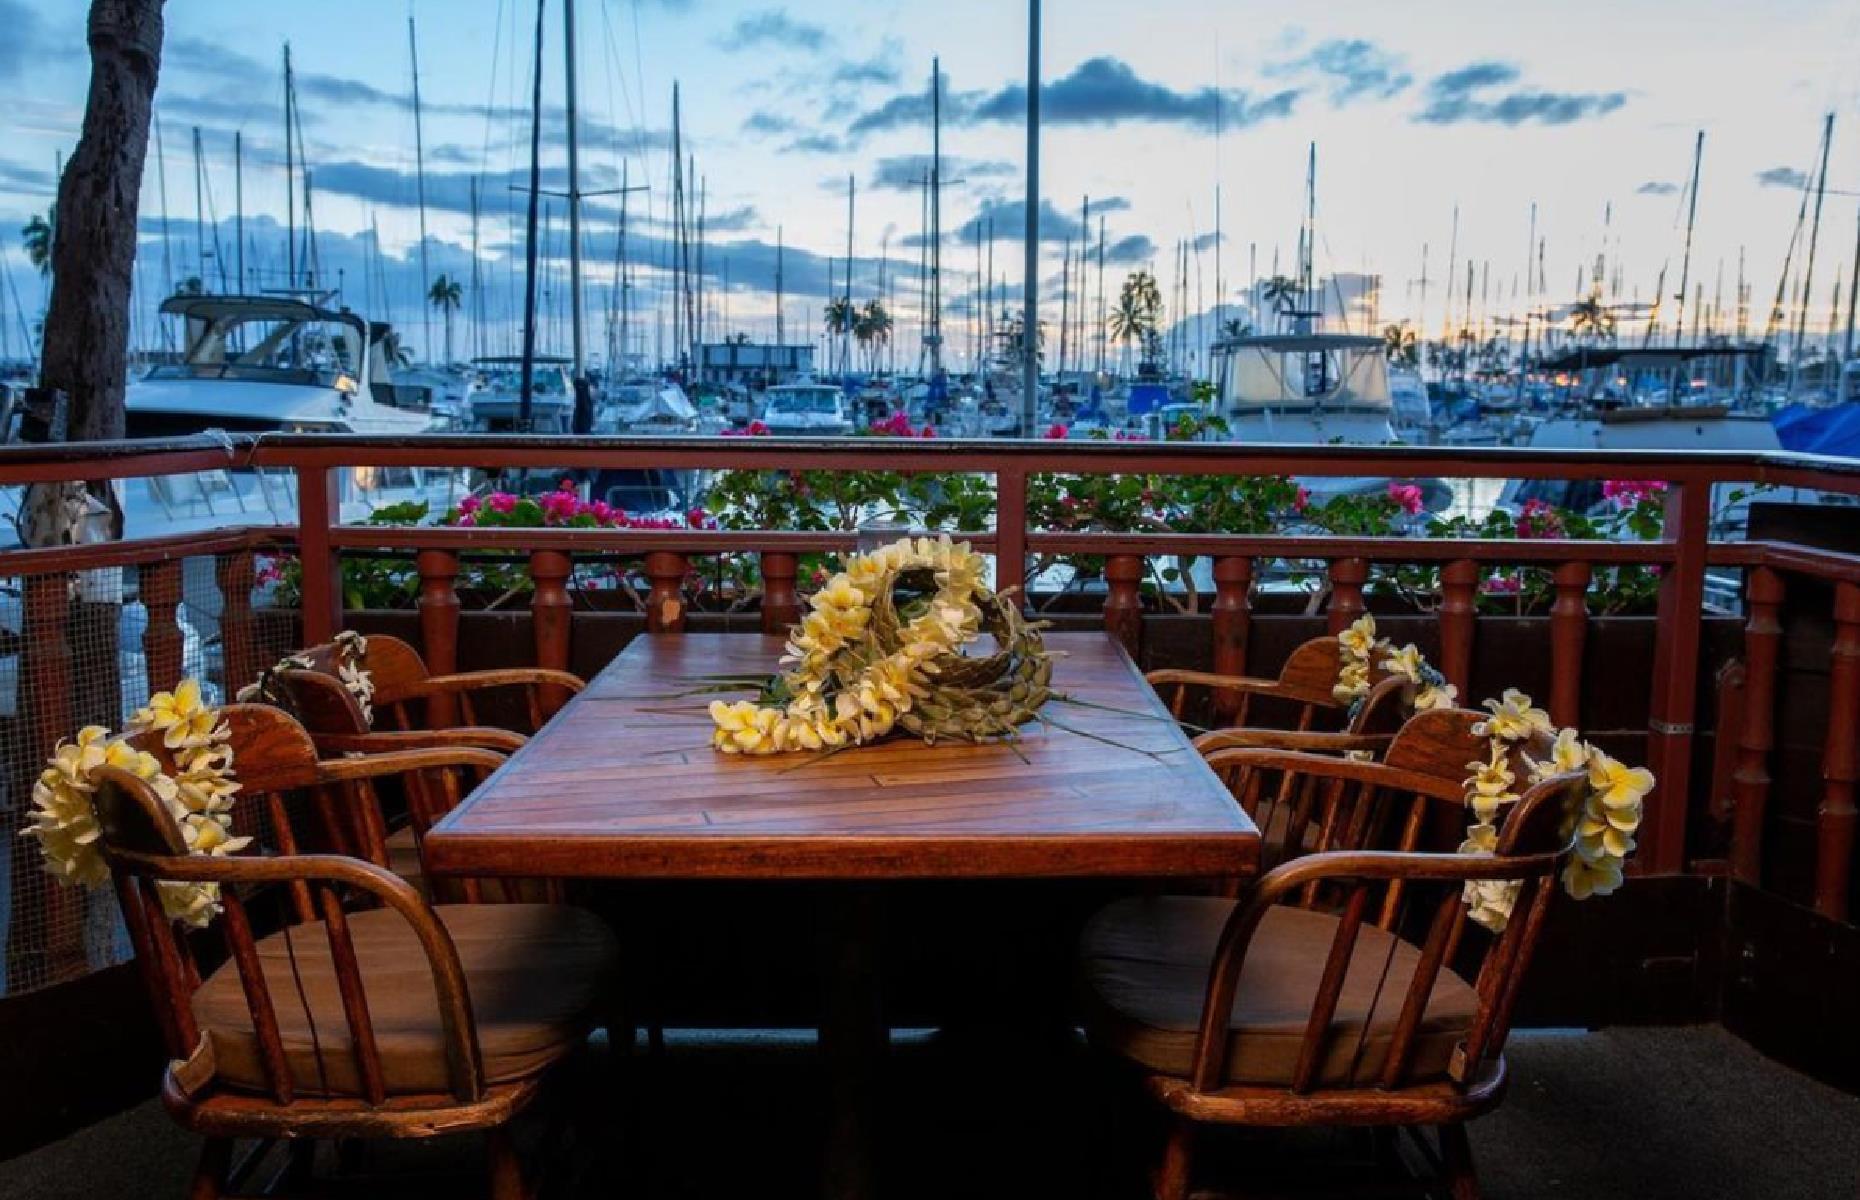 <p>It’s the setting that really elevates this popular date-night (or any special occasion) spot. The most coveted tables at Chart House Waikiki are on the balcony overlooking Ala Wai Boat Harbor, which looks especially lovely as the sunset casts a pink and golden glow. Beautiful blooms and rustic wooden furniture add to the charm of the restaurant, which is known for its succulent seafood platters, juicy steaks, and generous wedges of chocolate mud pie. </p>